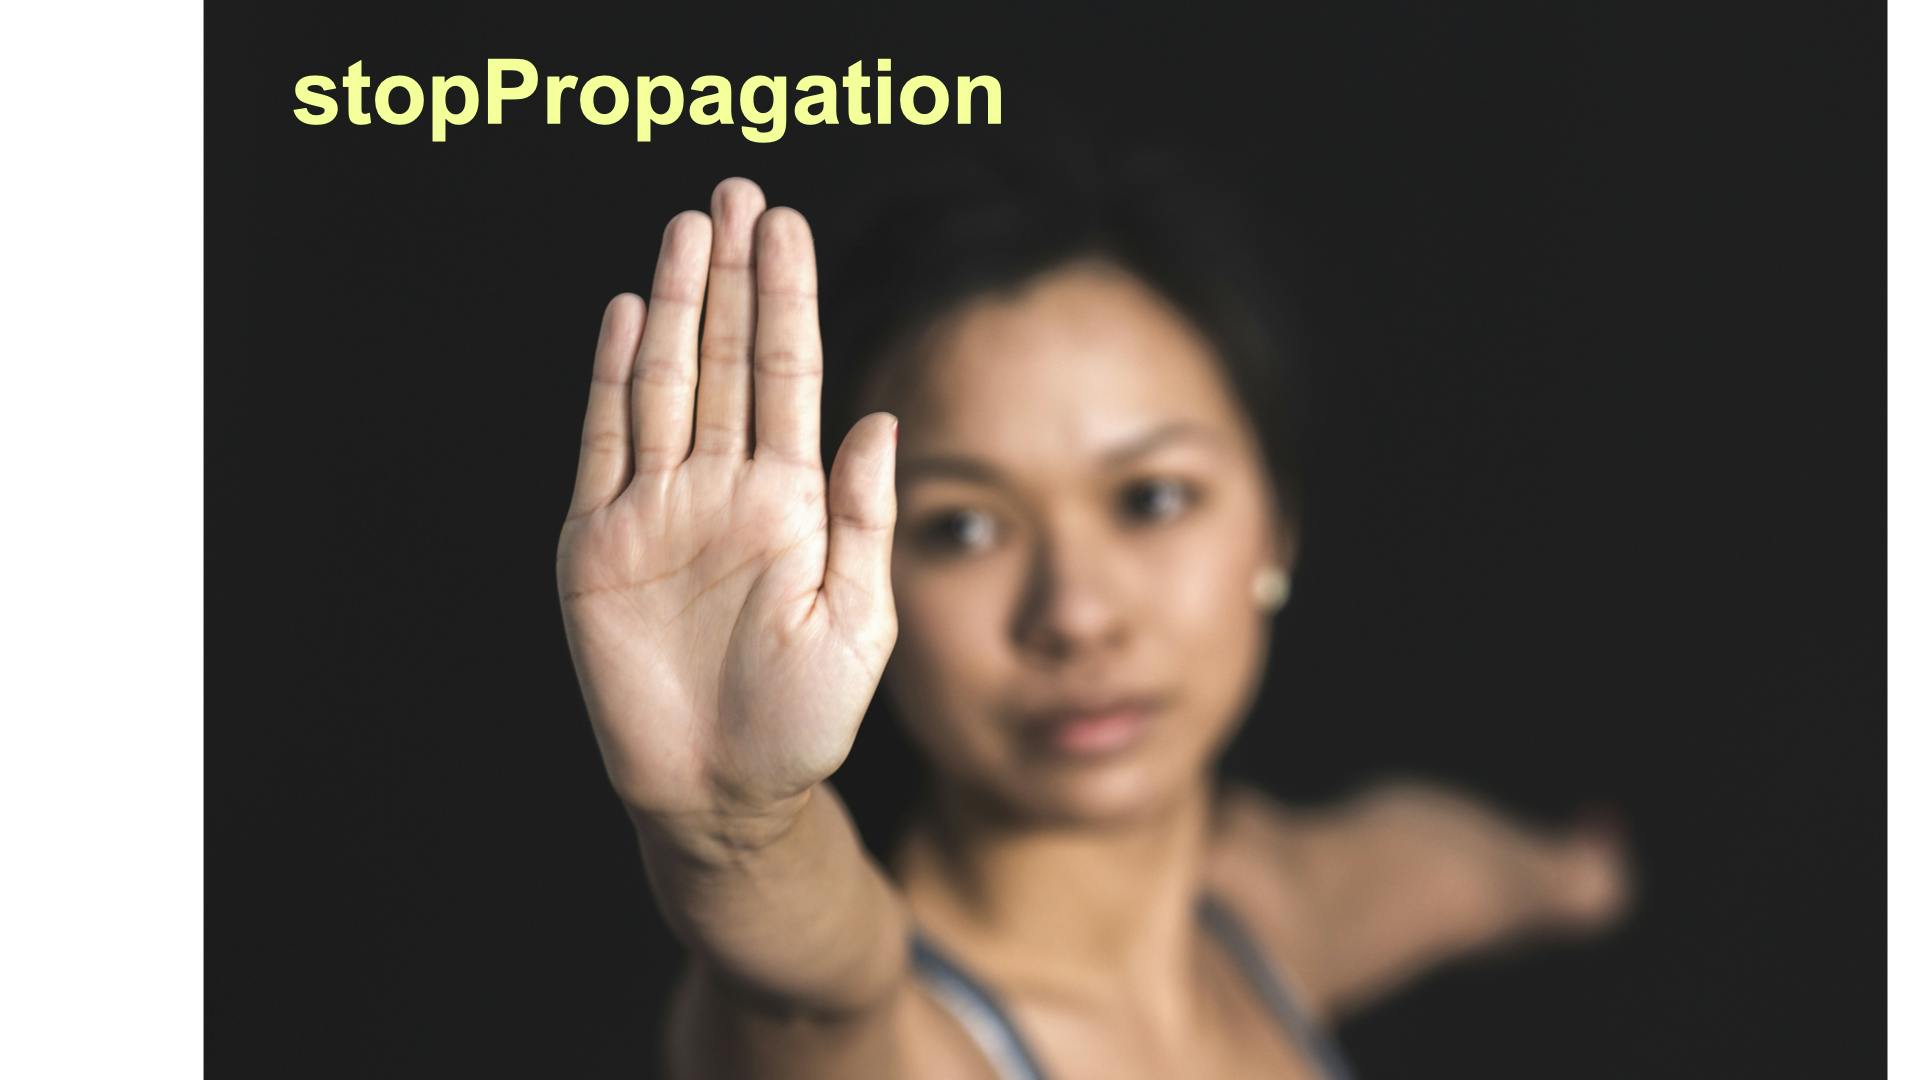 JavaScript stopPropagation method represented by a woman holding up her hand